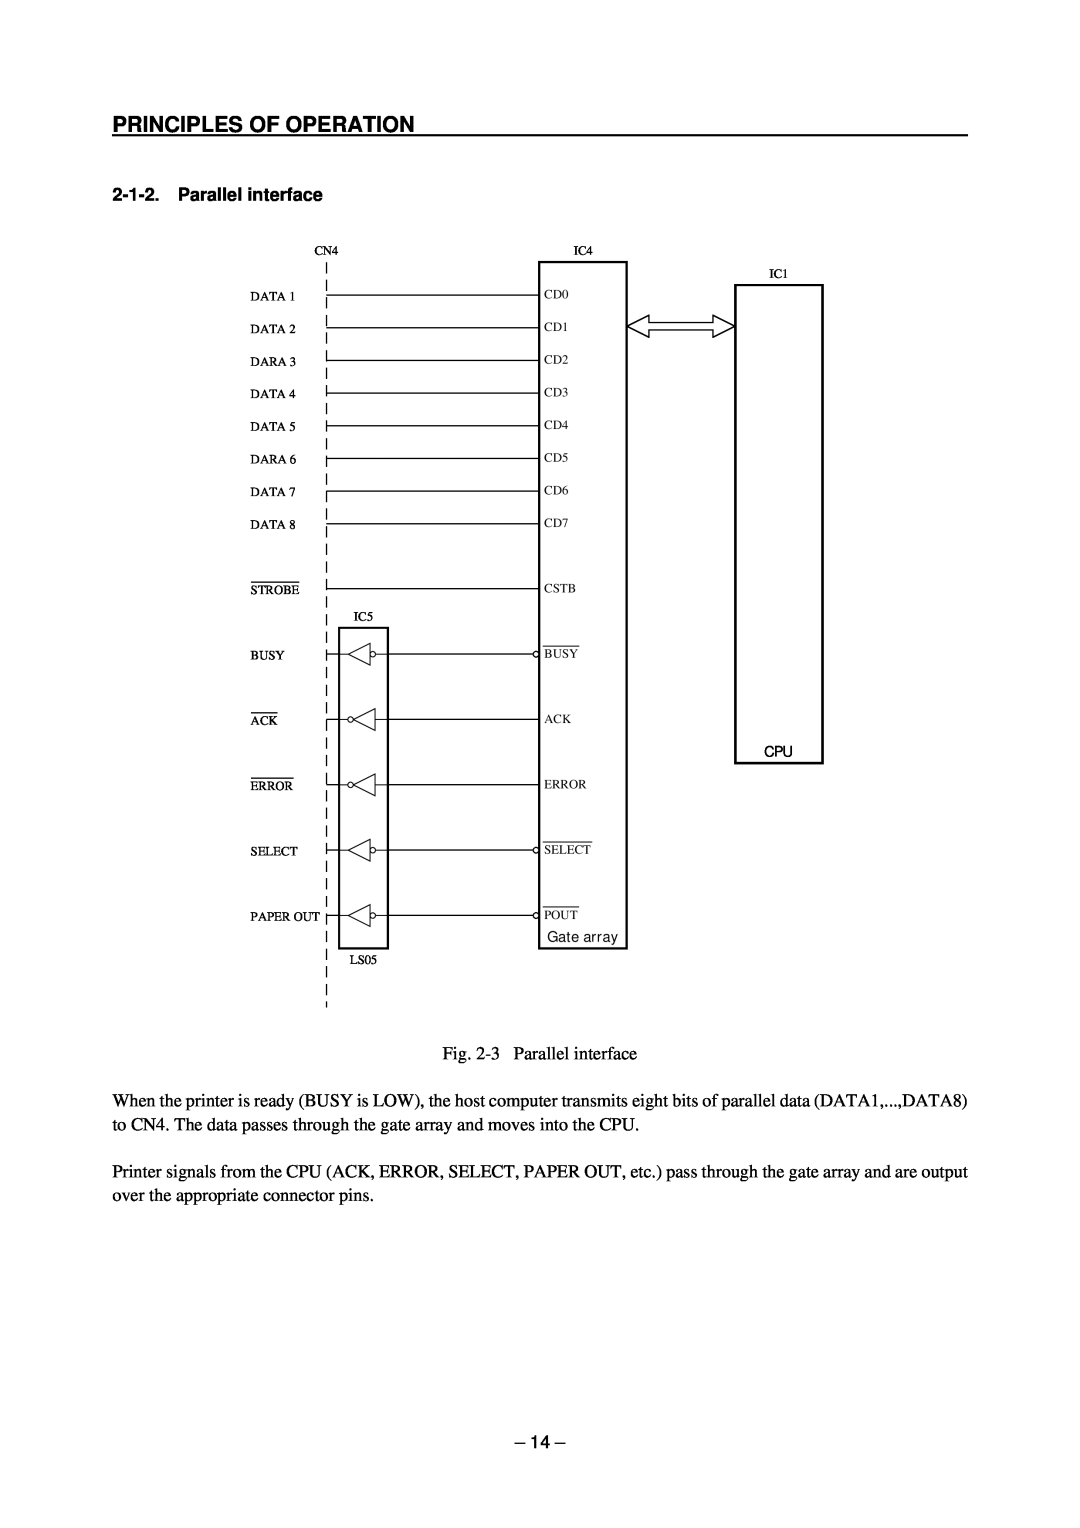 Star Micronics TSP200 technical manual Principles Of Operation, 3 Parallel interface 